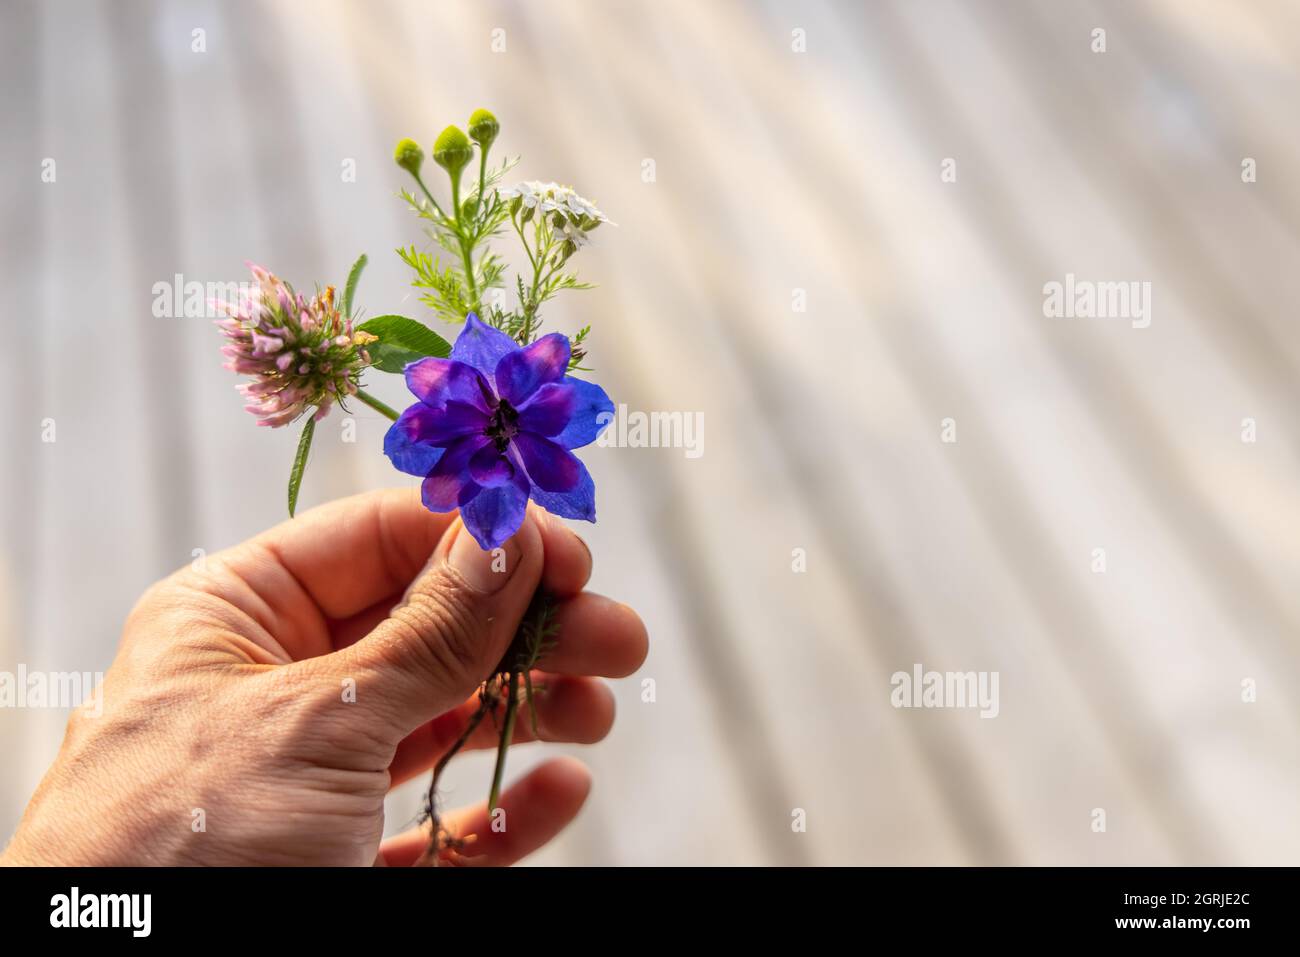 A detailed shot of a hand of a person, holding a beautiful plucked flower, purple and pink in shades, some flower buds can also be seen. Stock Photo